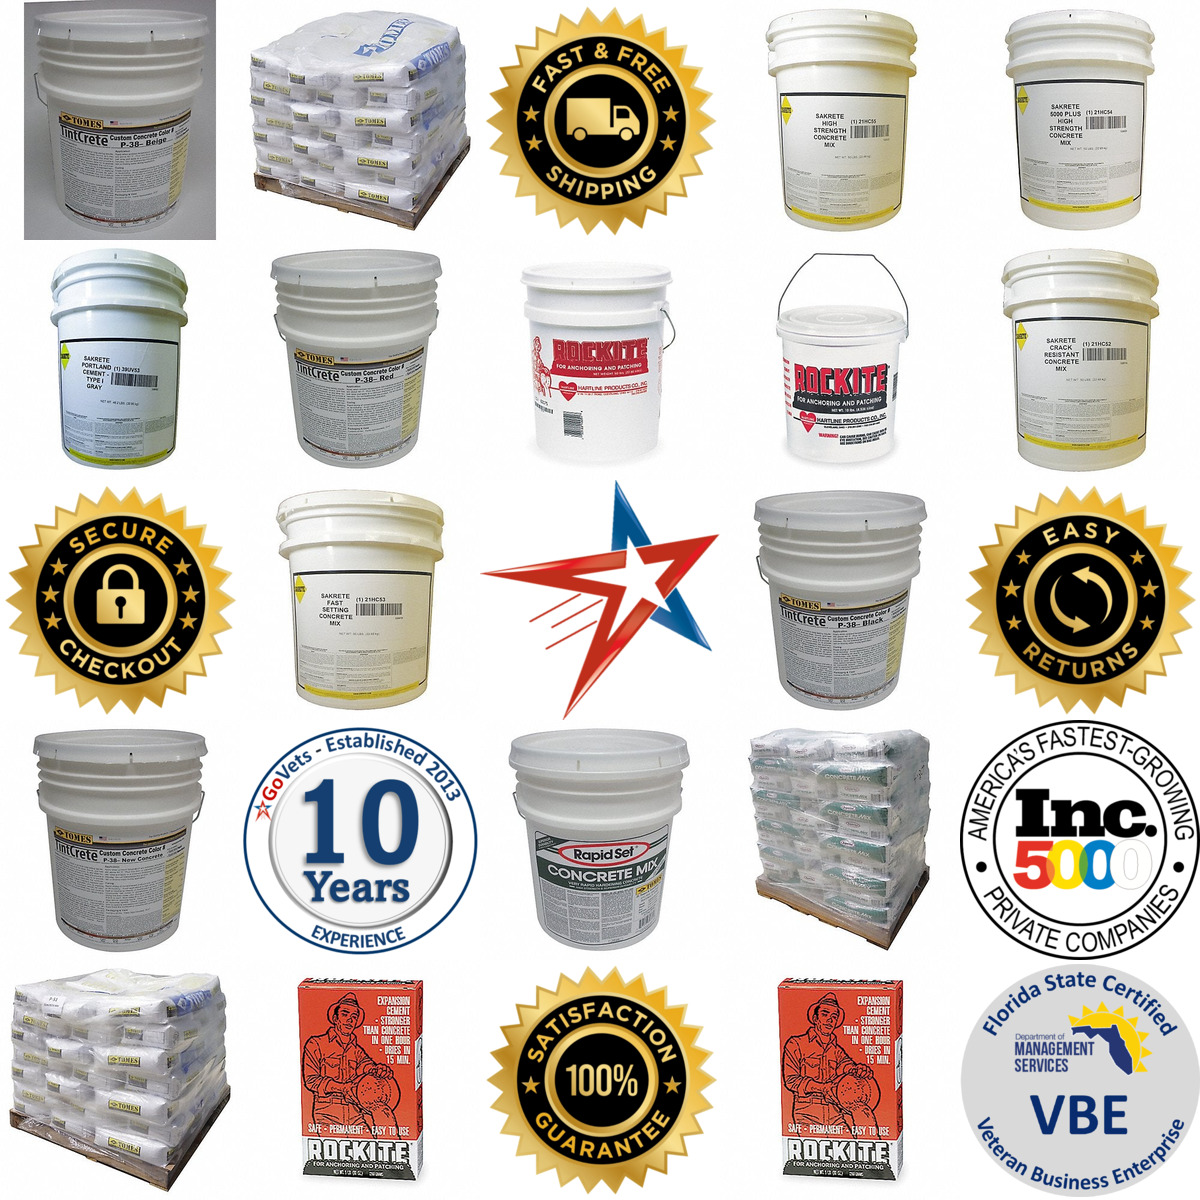 A selection of Concrete Mix products on GoVets